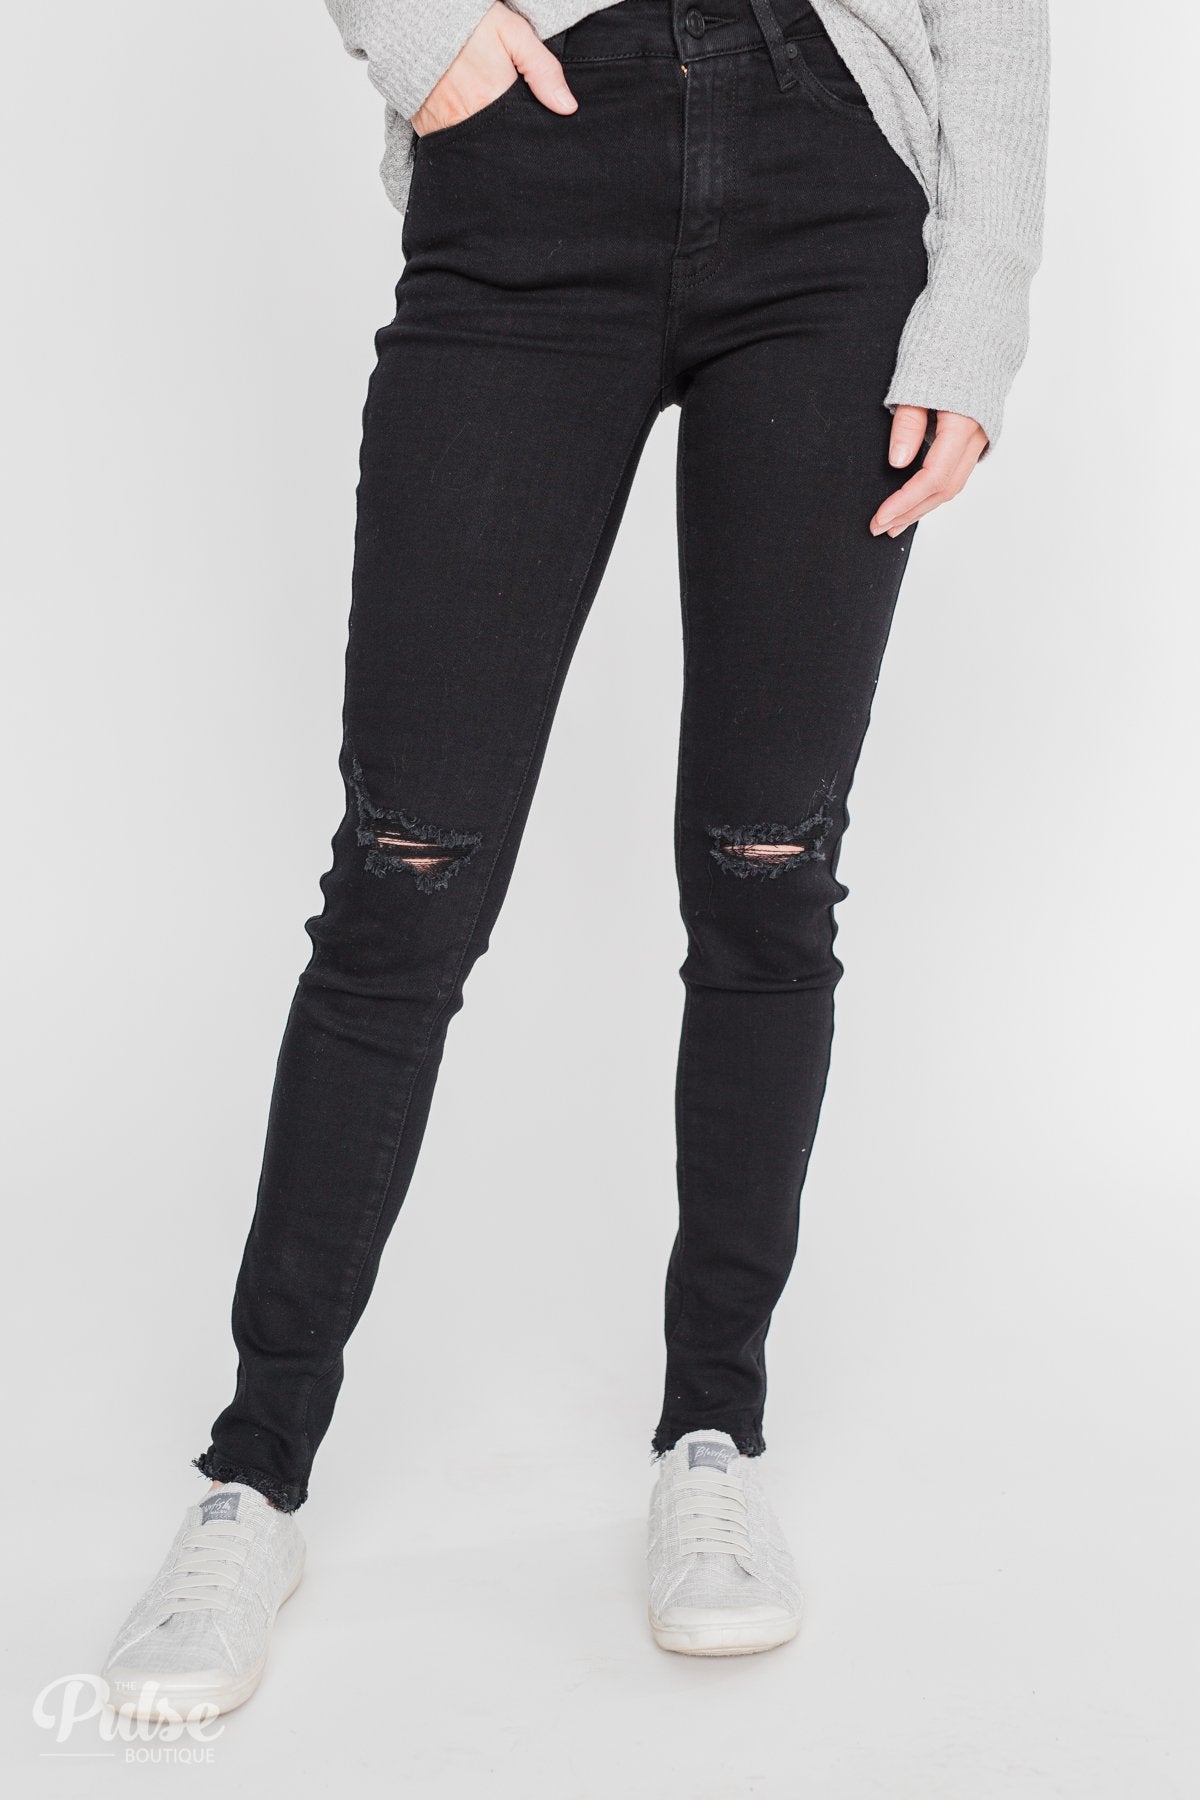 KanCan Rylee Jeans - Black Distressed – The Pulse Boutique